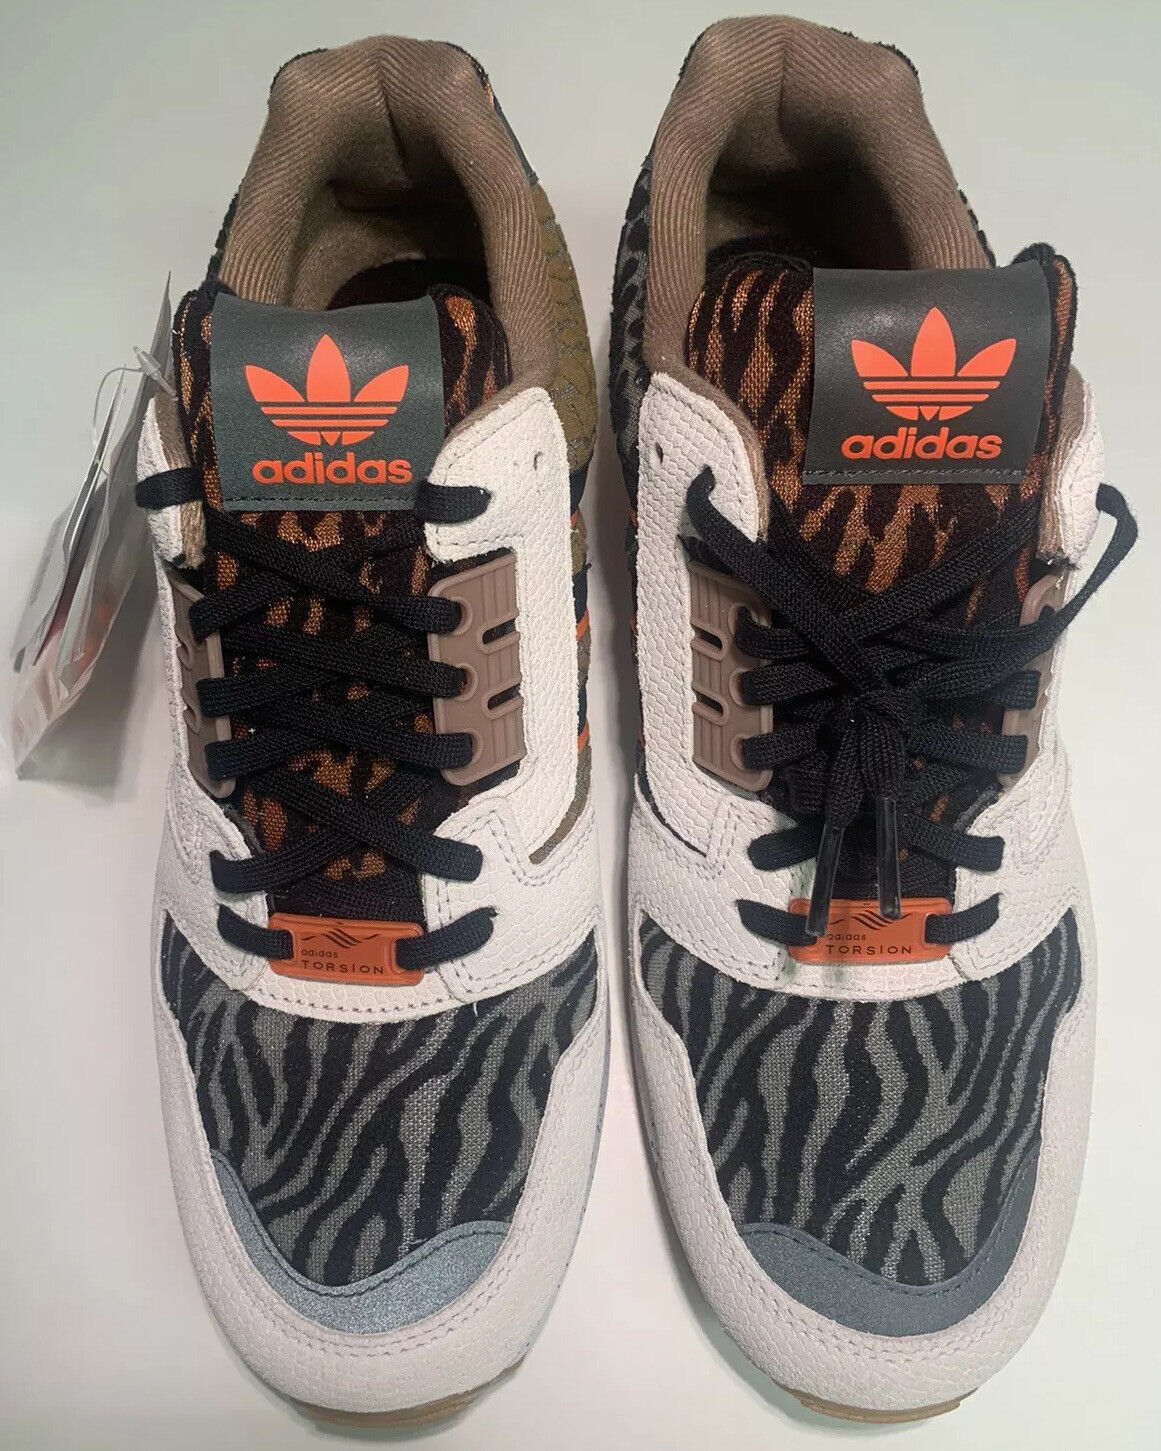 ATMOS × ADIDAS ZX 8000 CRAZY ANIMAL UK9 FY5246 (2020 Asia Release 